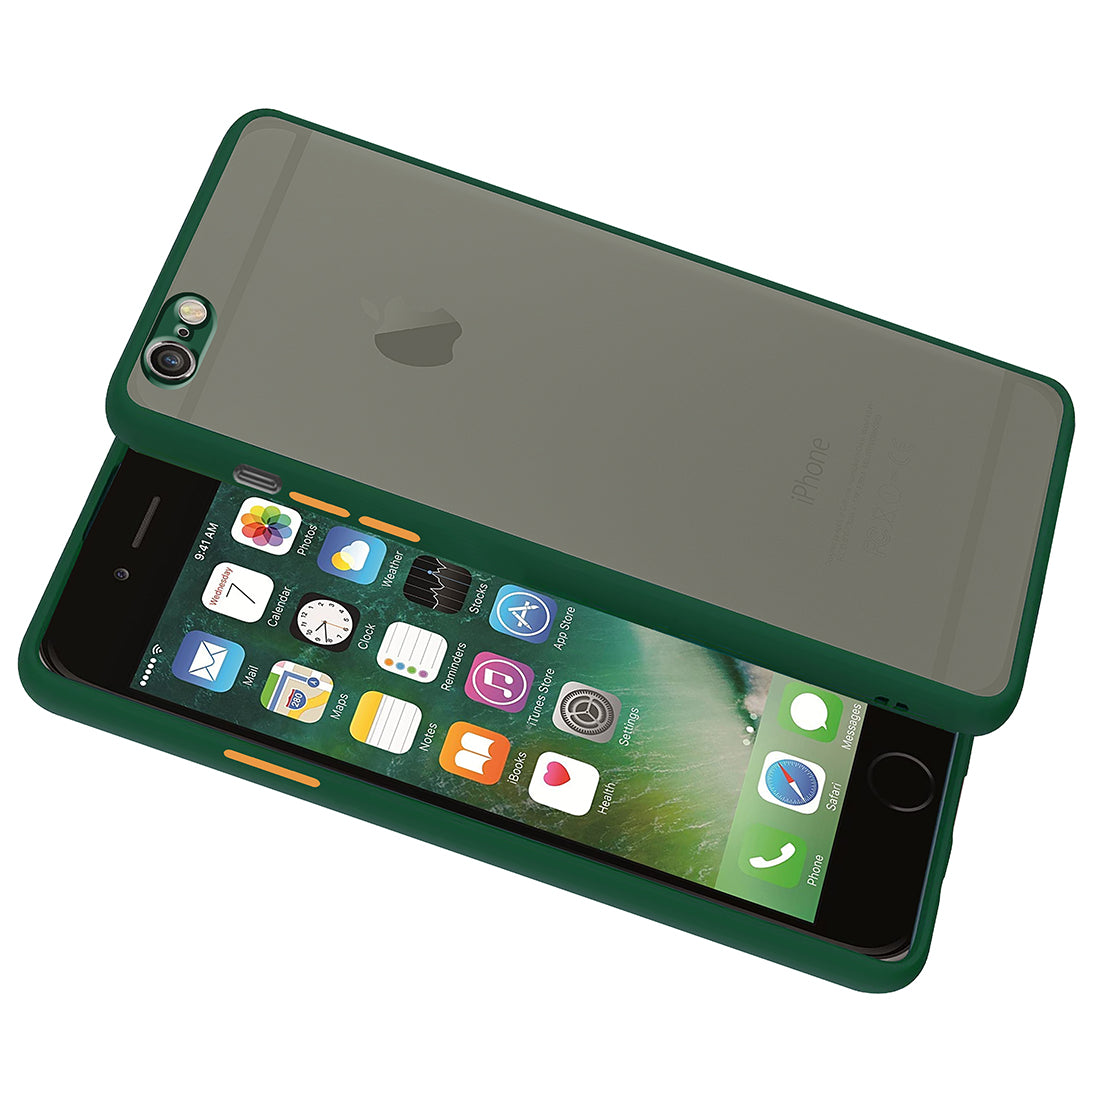 Smoke Back Case Cover for Apple iPhone 6 / 6S